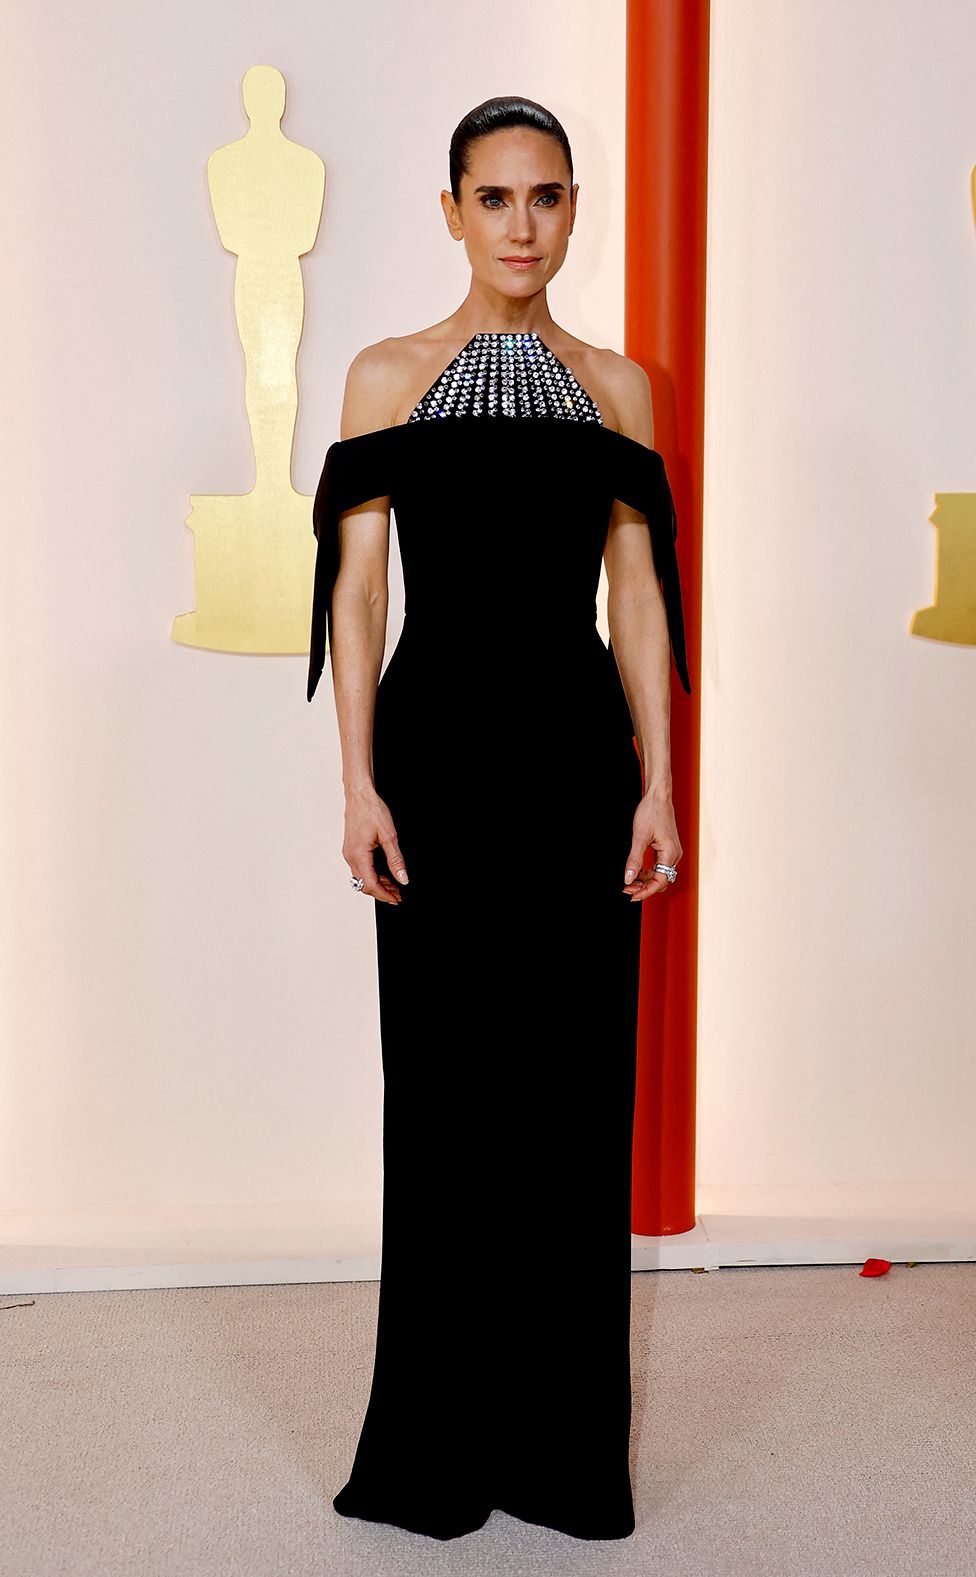 Jennifer Connelly poses on the champagne-colored red carpet during the Oscars arrivals at the 95th Academy Awards in Hollywood, Los Angeles, California, U.S., March 12, 2023